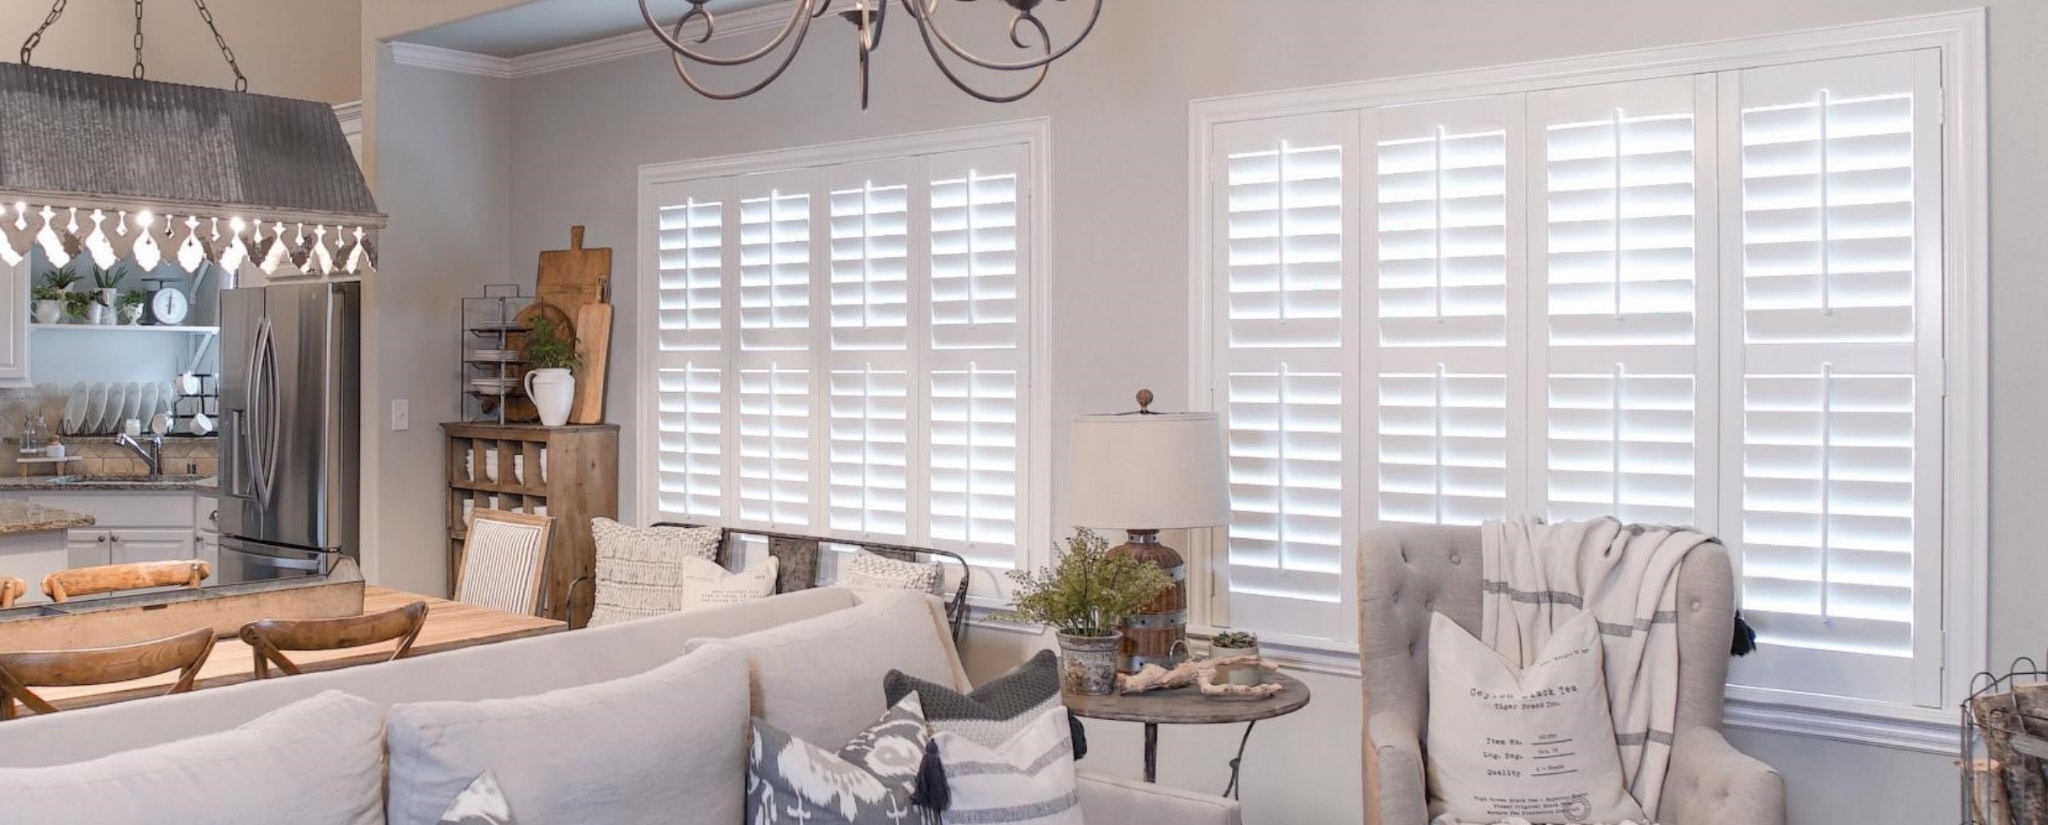 Kids bedroom with plantation shutters